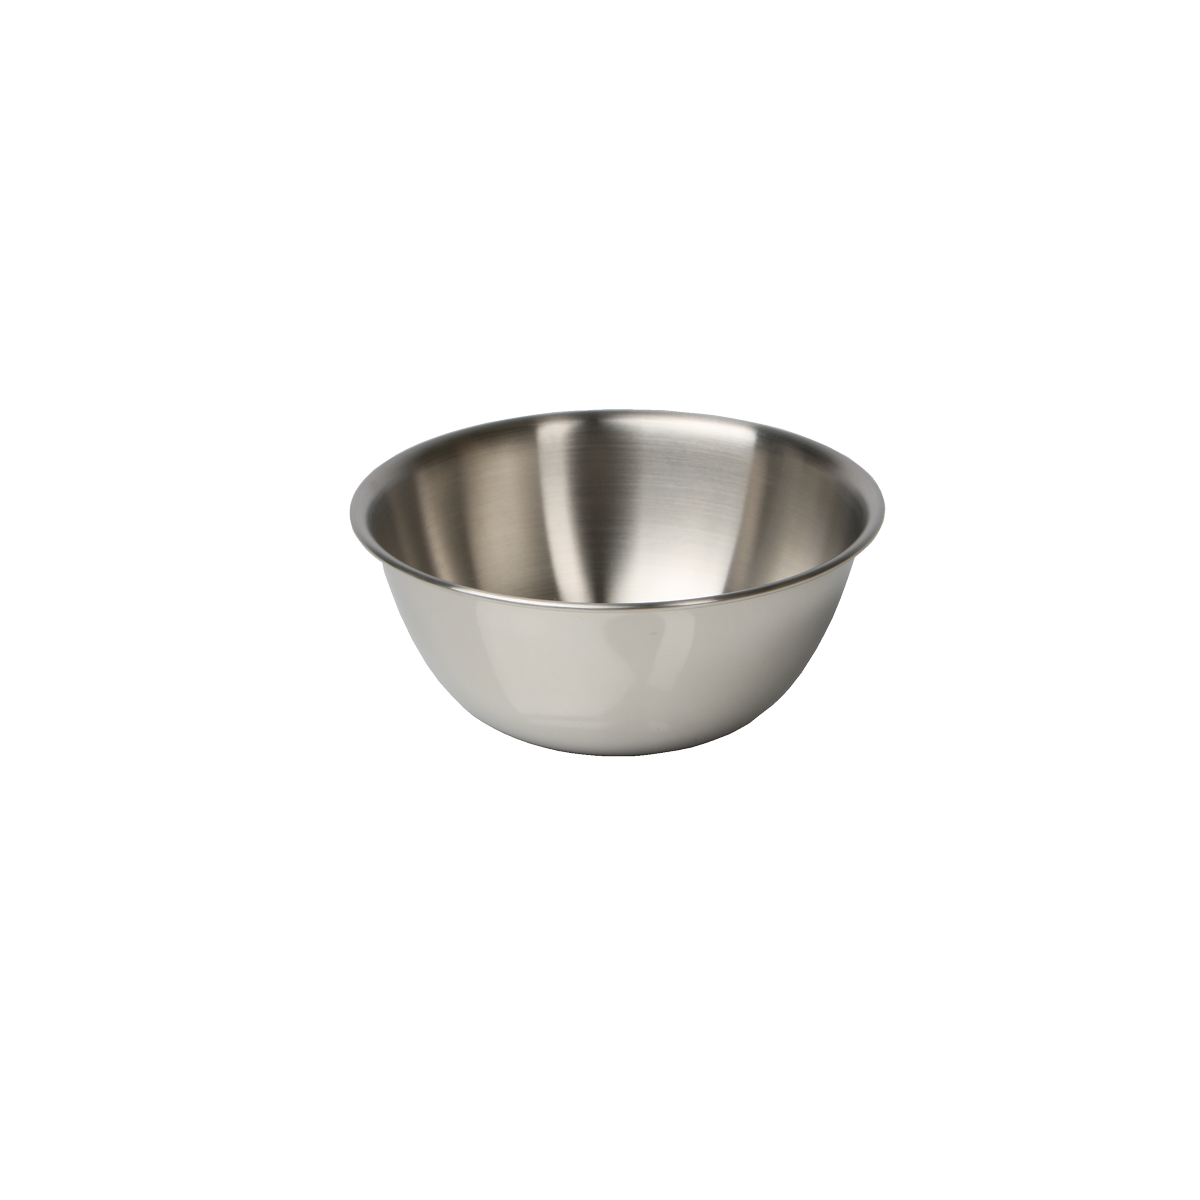 Mixing Bowl, 5 QT, Stainless Steel, Heavy Duty, Silicone Bottom, LIBERTY  WARE MB05SB